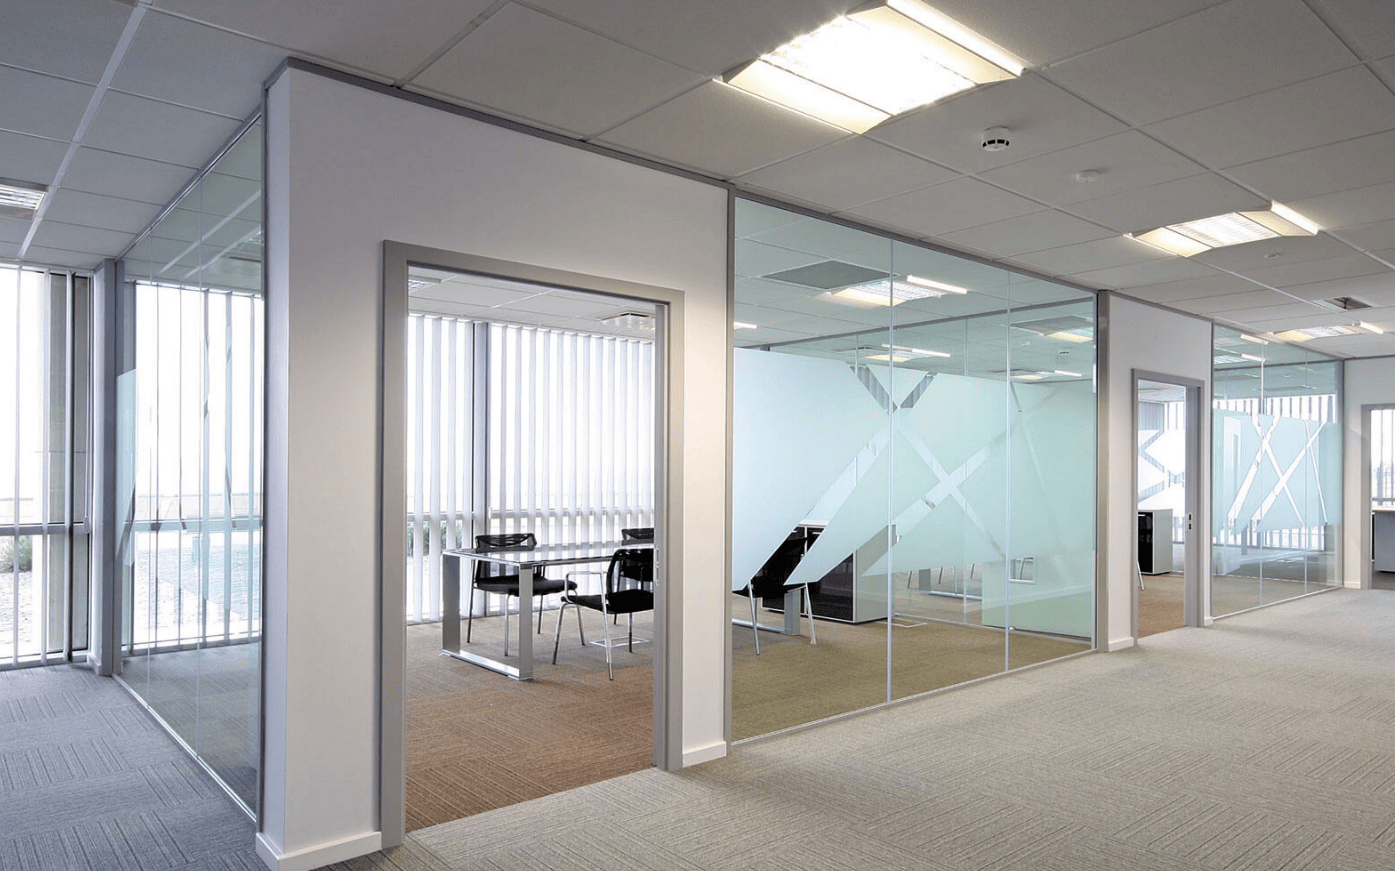 Office partioning creating multiple meeting rooms